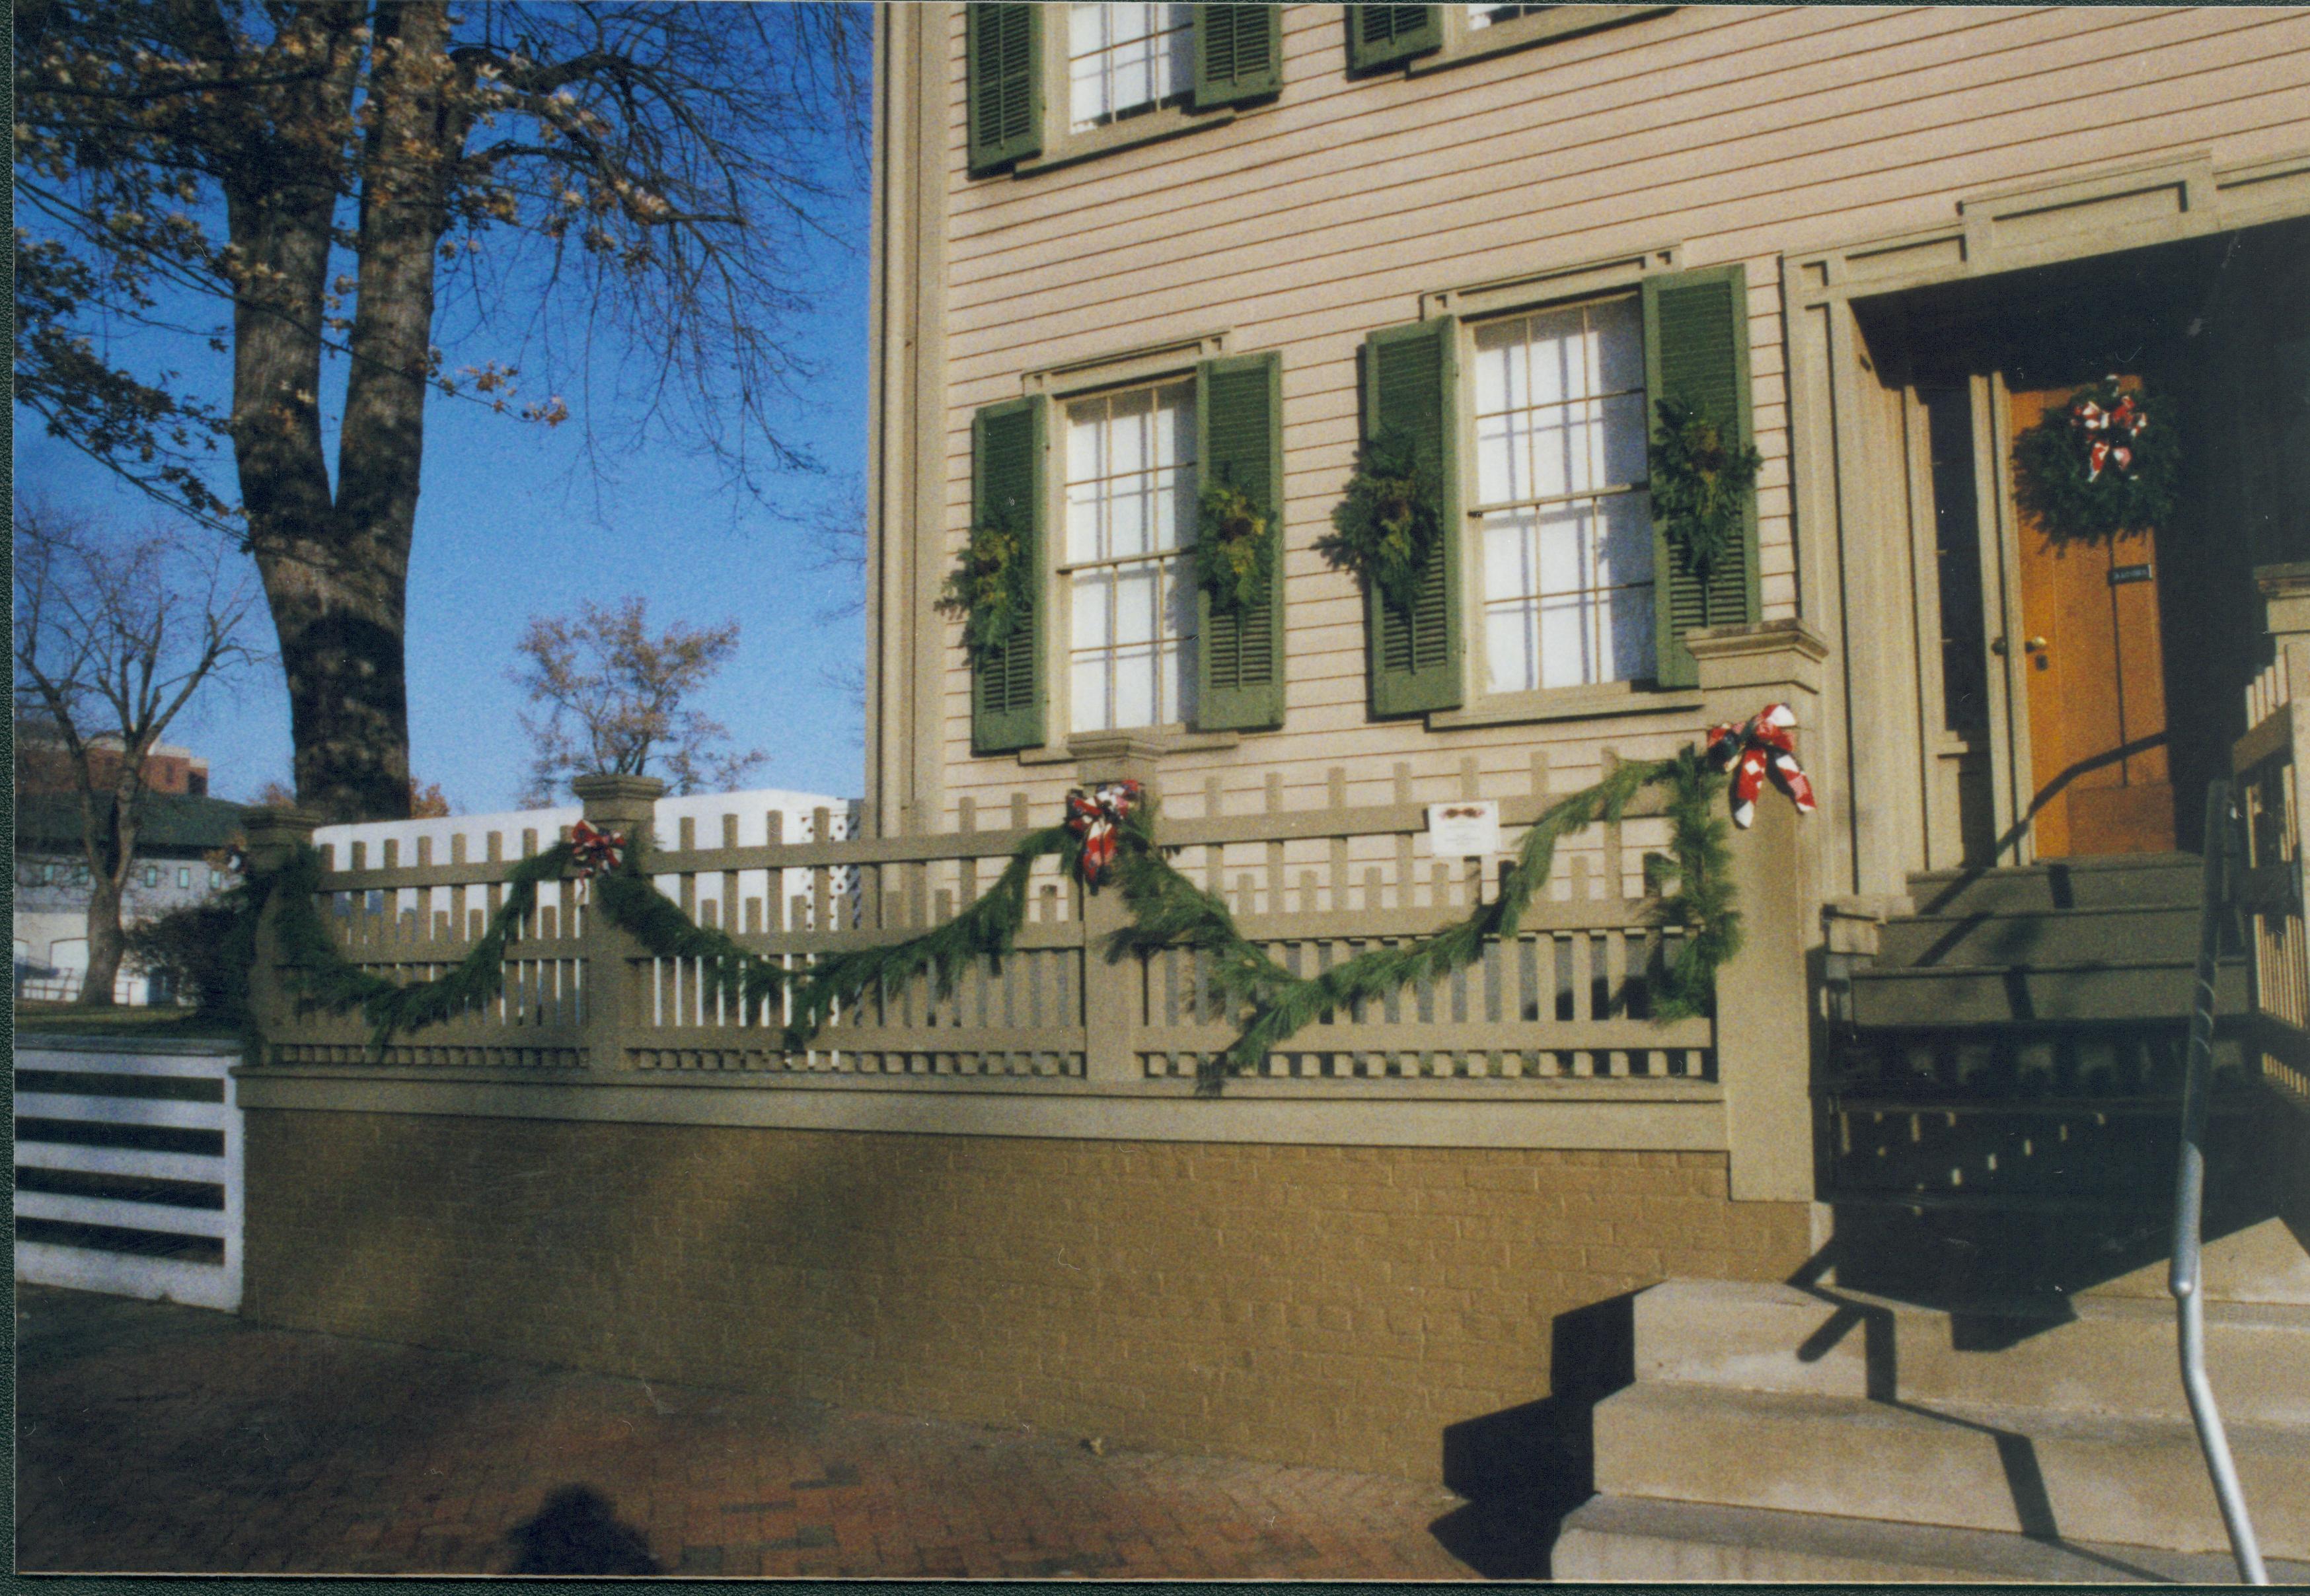 Christmas decorations on West side of Lincoln Home Lincoln Home NHS- Christmas in Lincoln Neighborhood 2000, HS-01 2000-10 Christmas, decorations, neighborhood